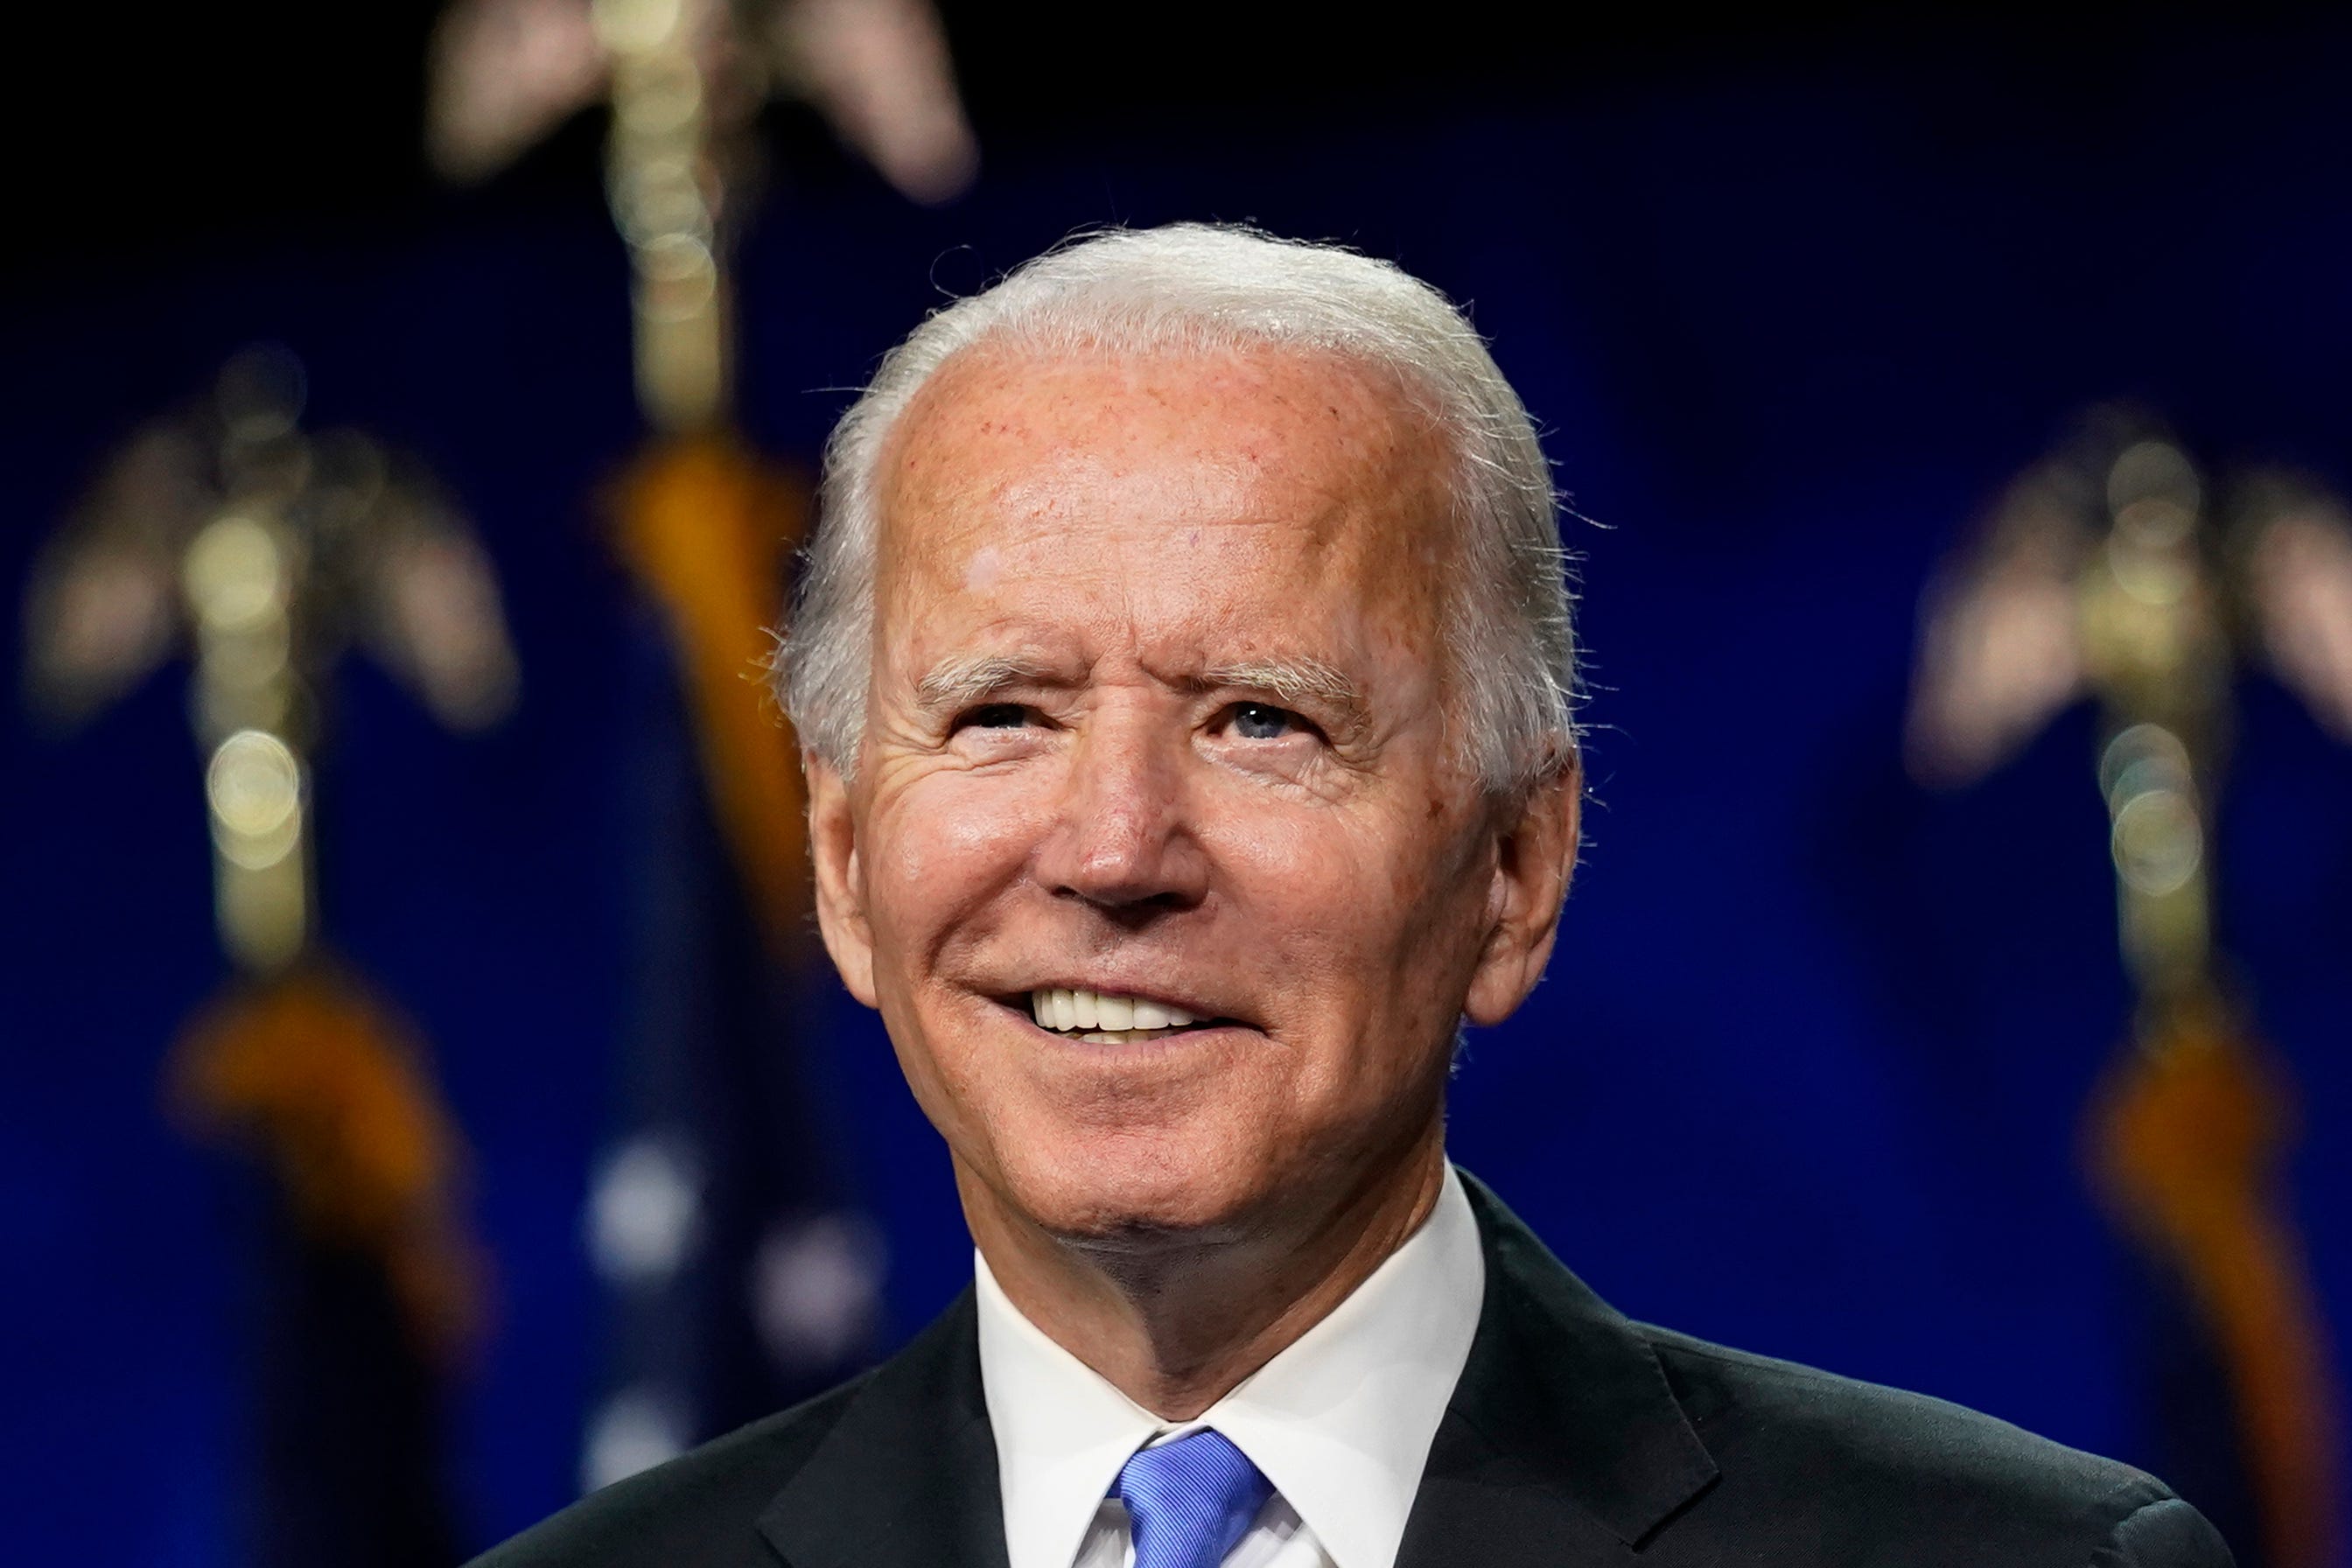 joe biden transsexual - Biden|President|Joe|States|Delaware|Obama|Vice|Senate|Campaign|Election|Time|Administration|House|Law|People|Years|Family|Year|Trump|School|University|Senator|Office|Party|Country|Committee|Act|War|Days|Climate|Hunter|Health|America|State|Day|Democrats|Americans|Documents|Care|Plan|United States|Vice President|White House|Joe Biden|Biden Administration|Democratic Party|Law School|Presidential Election|President Joe Biden|Executive Orders|Foreign Relations Committee|Presidential Campaign|Second Term|47Th Vice President|Syracuse University|Climate Change|Hillary Clinton|Last Year|Barack Obama|Joseph Robinette Biden|U.S. Senator|Health Care|U.S. Senate|Donald Trump|President Trump|President Biden|Federal Register|Judiciary Committee|Presidential Nomination|Presidential Medal